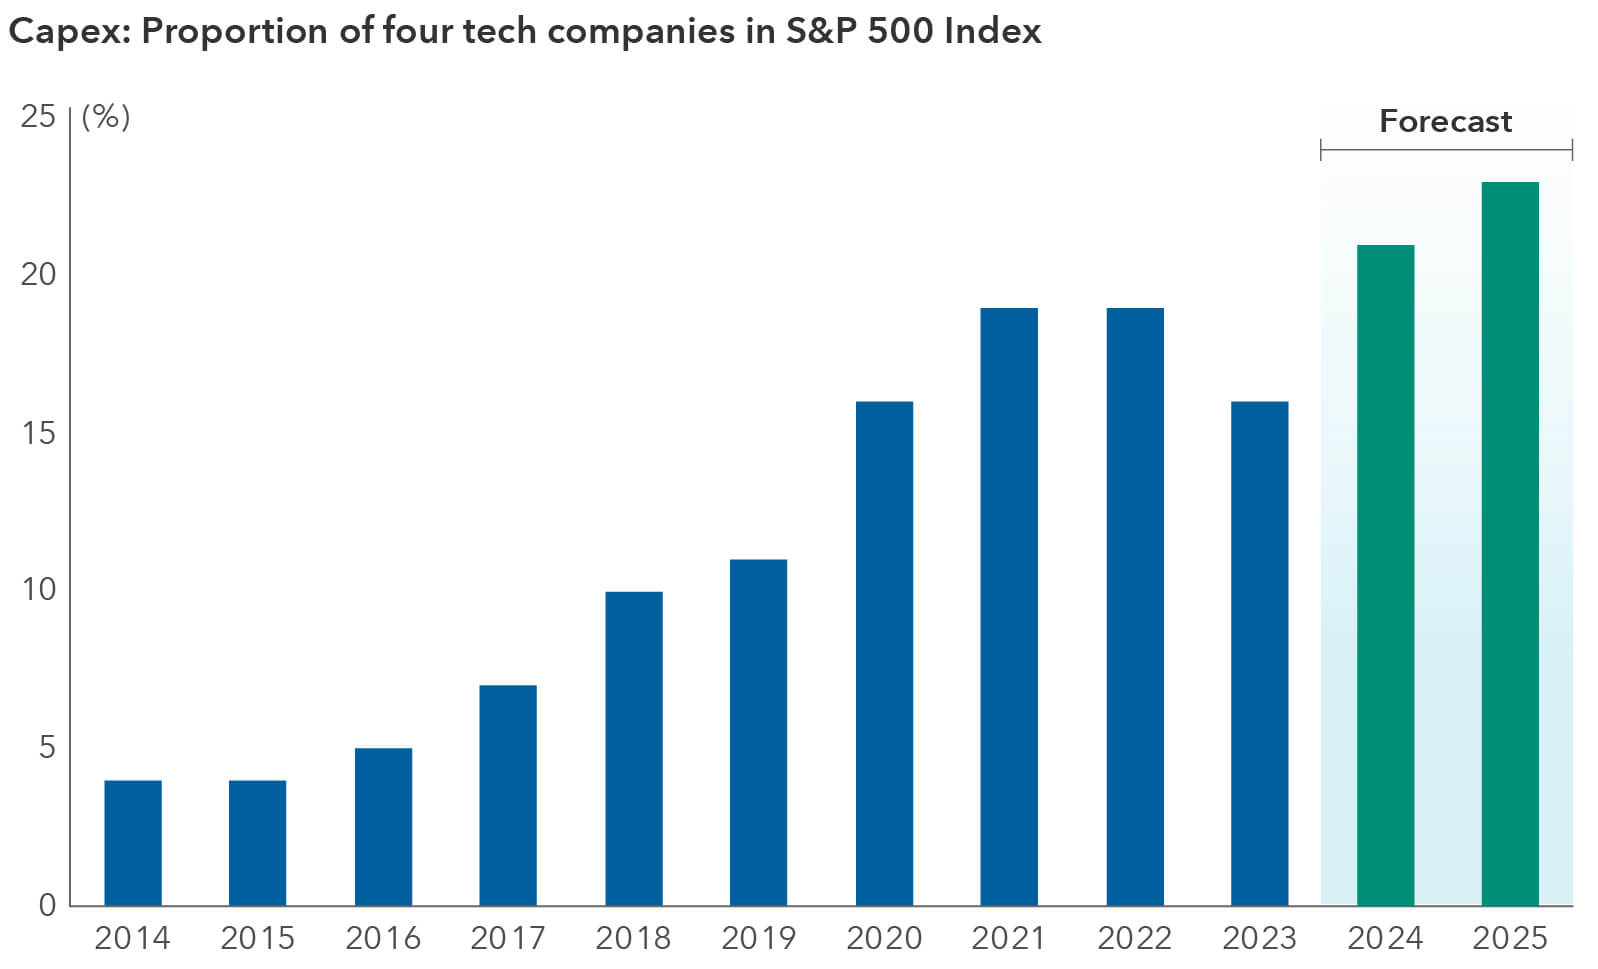 The bar chart shows capital expenditures from Alphabet, Amazon, Meta and Microsoft from 2014 to 2025, where 2024 and 2025 are estimates. The figures represent the companies' capex as a percentage of the total S&P 500 Index capital expenditures in each year. The percentages from 2014 to 2025 are as follows: 4%, 4%, 5%, 7%, 10%, 11%, 16%, 19%, 19%, 16%, 21% and 23%, respectively.